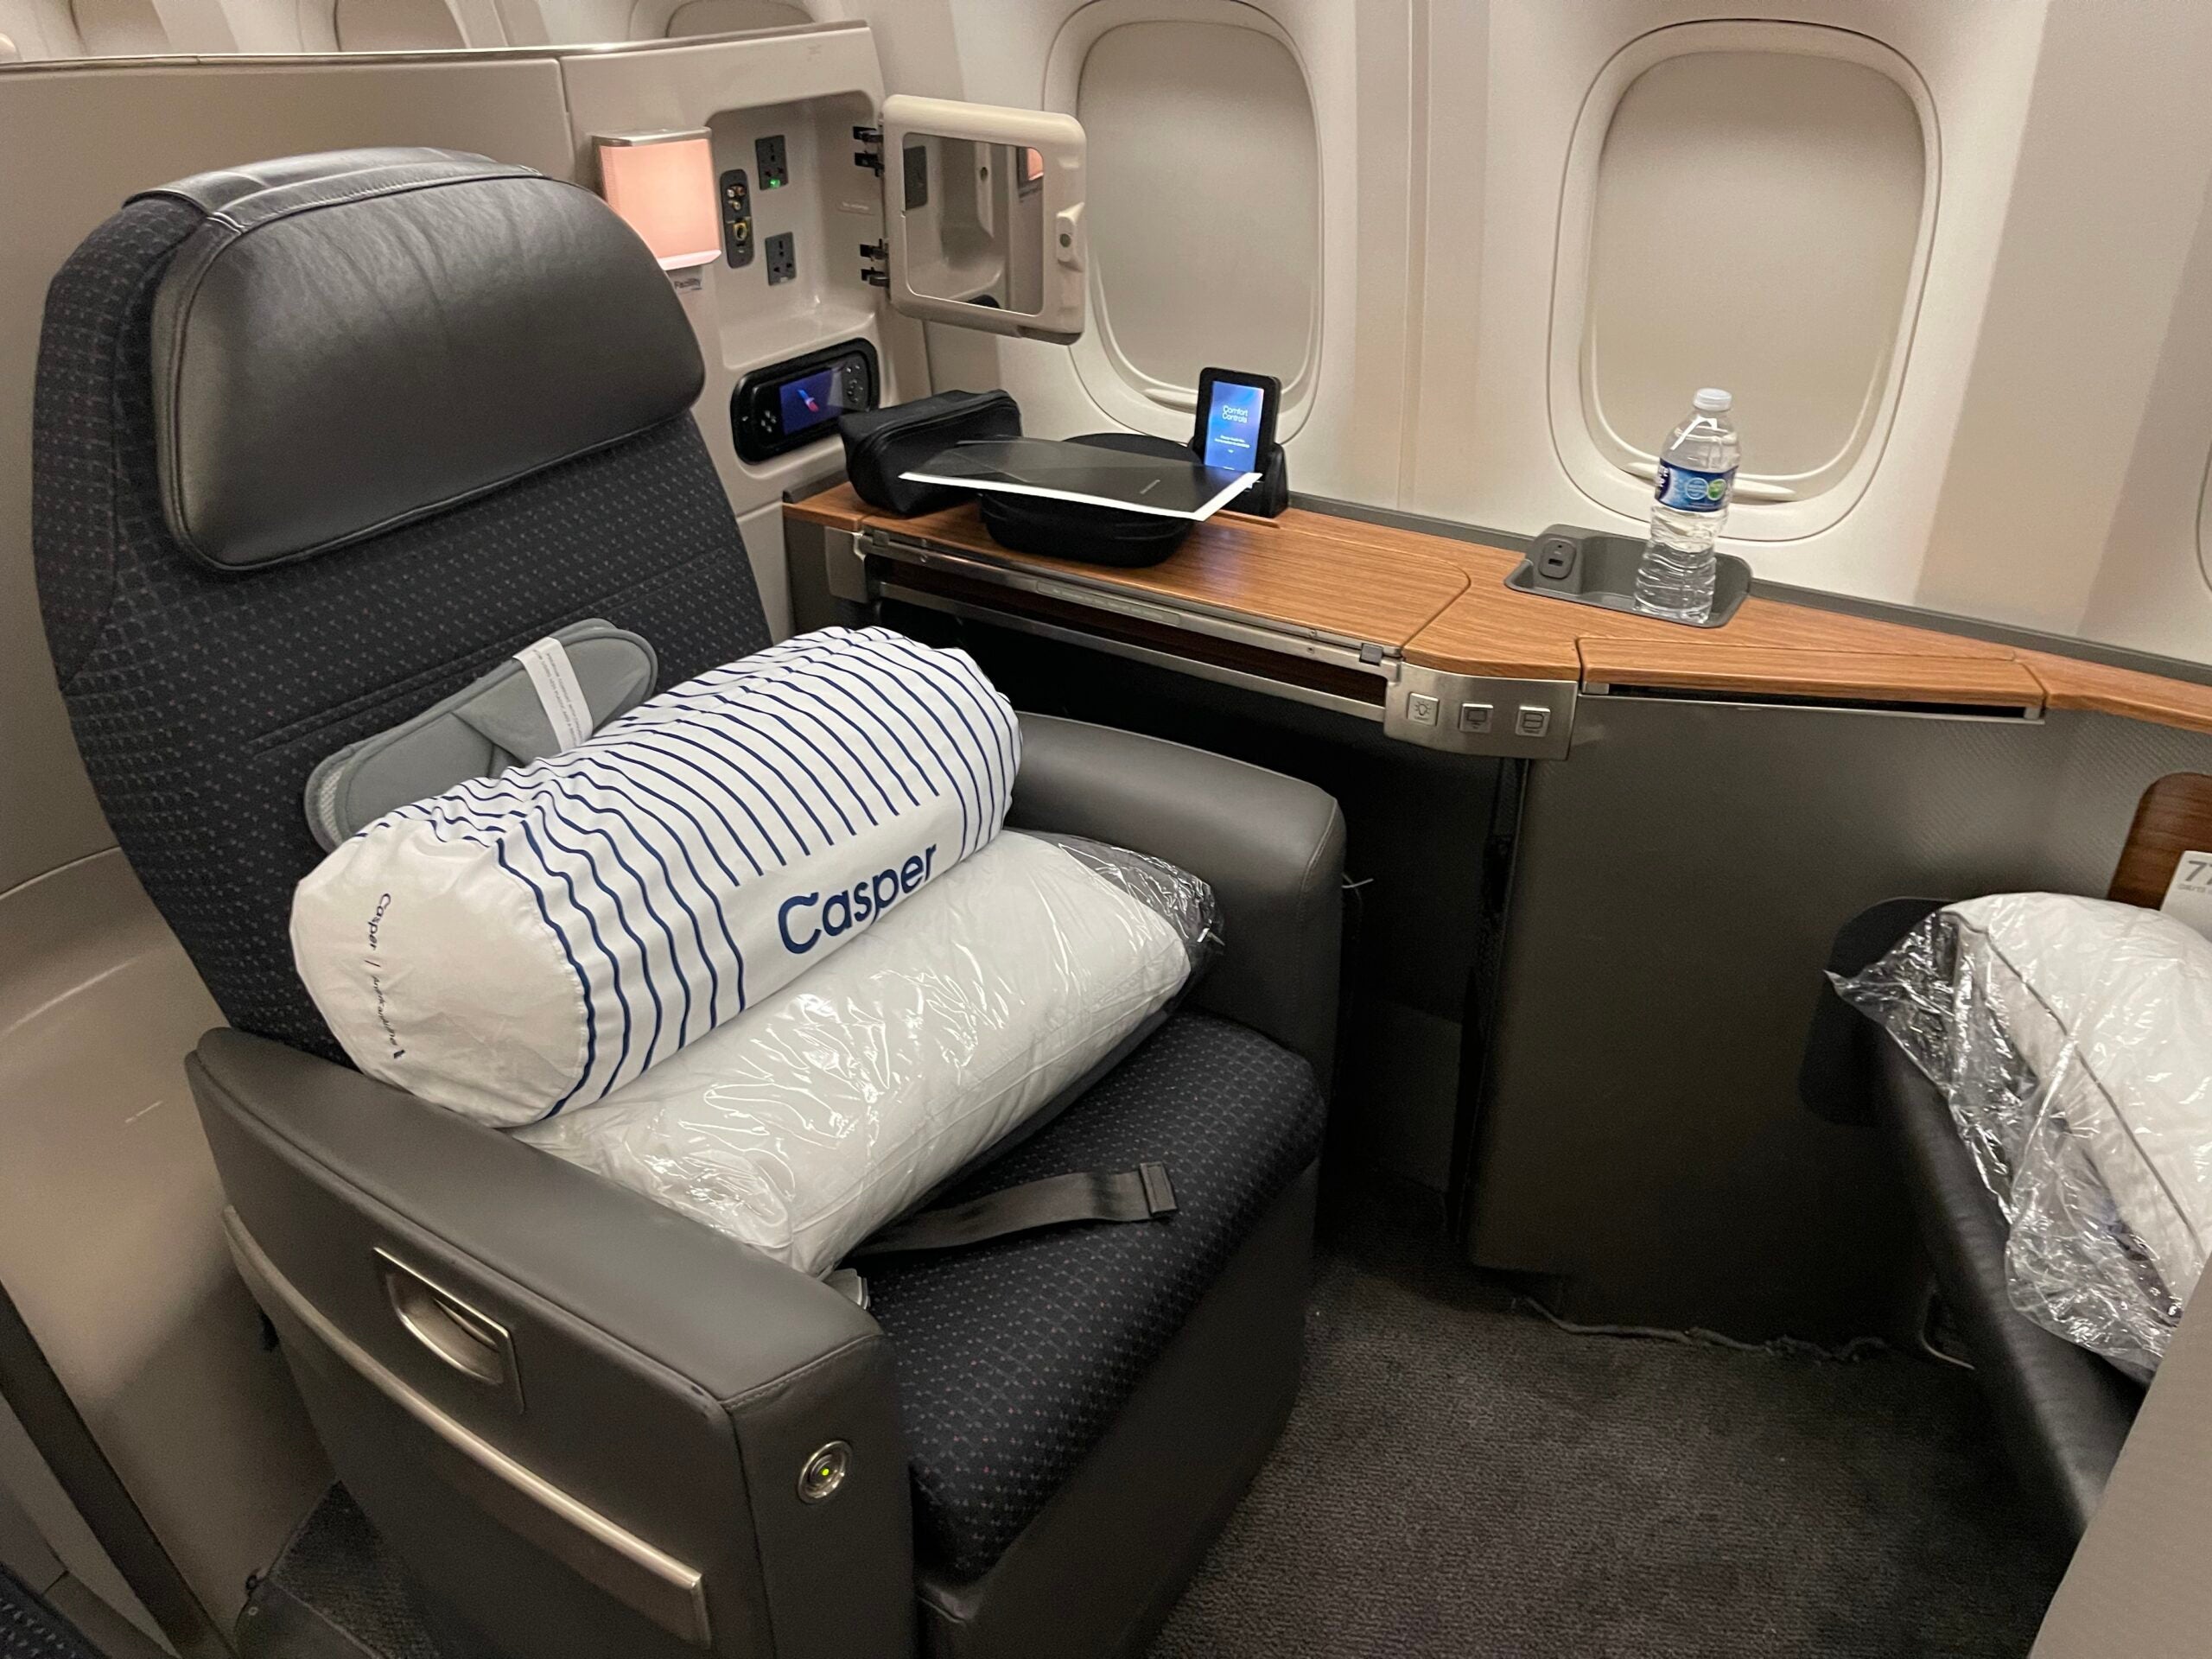 American Airlines Flagship First 1A seat